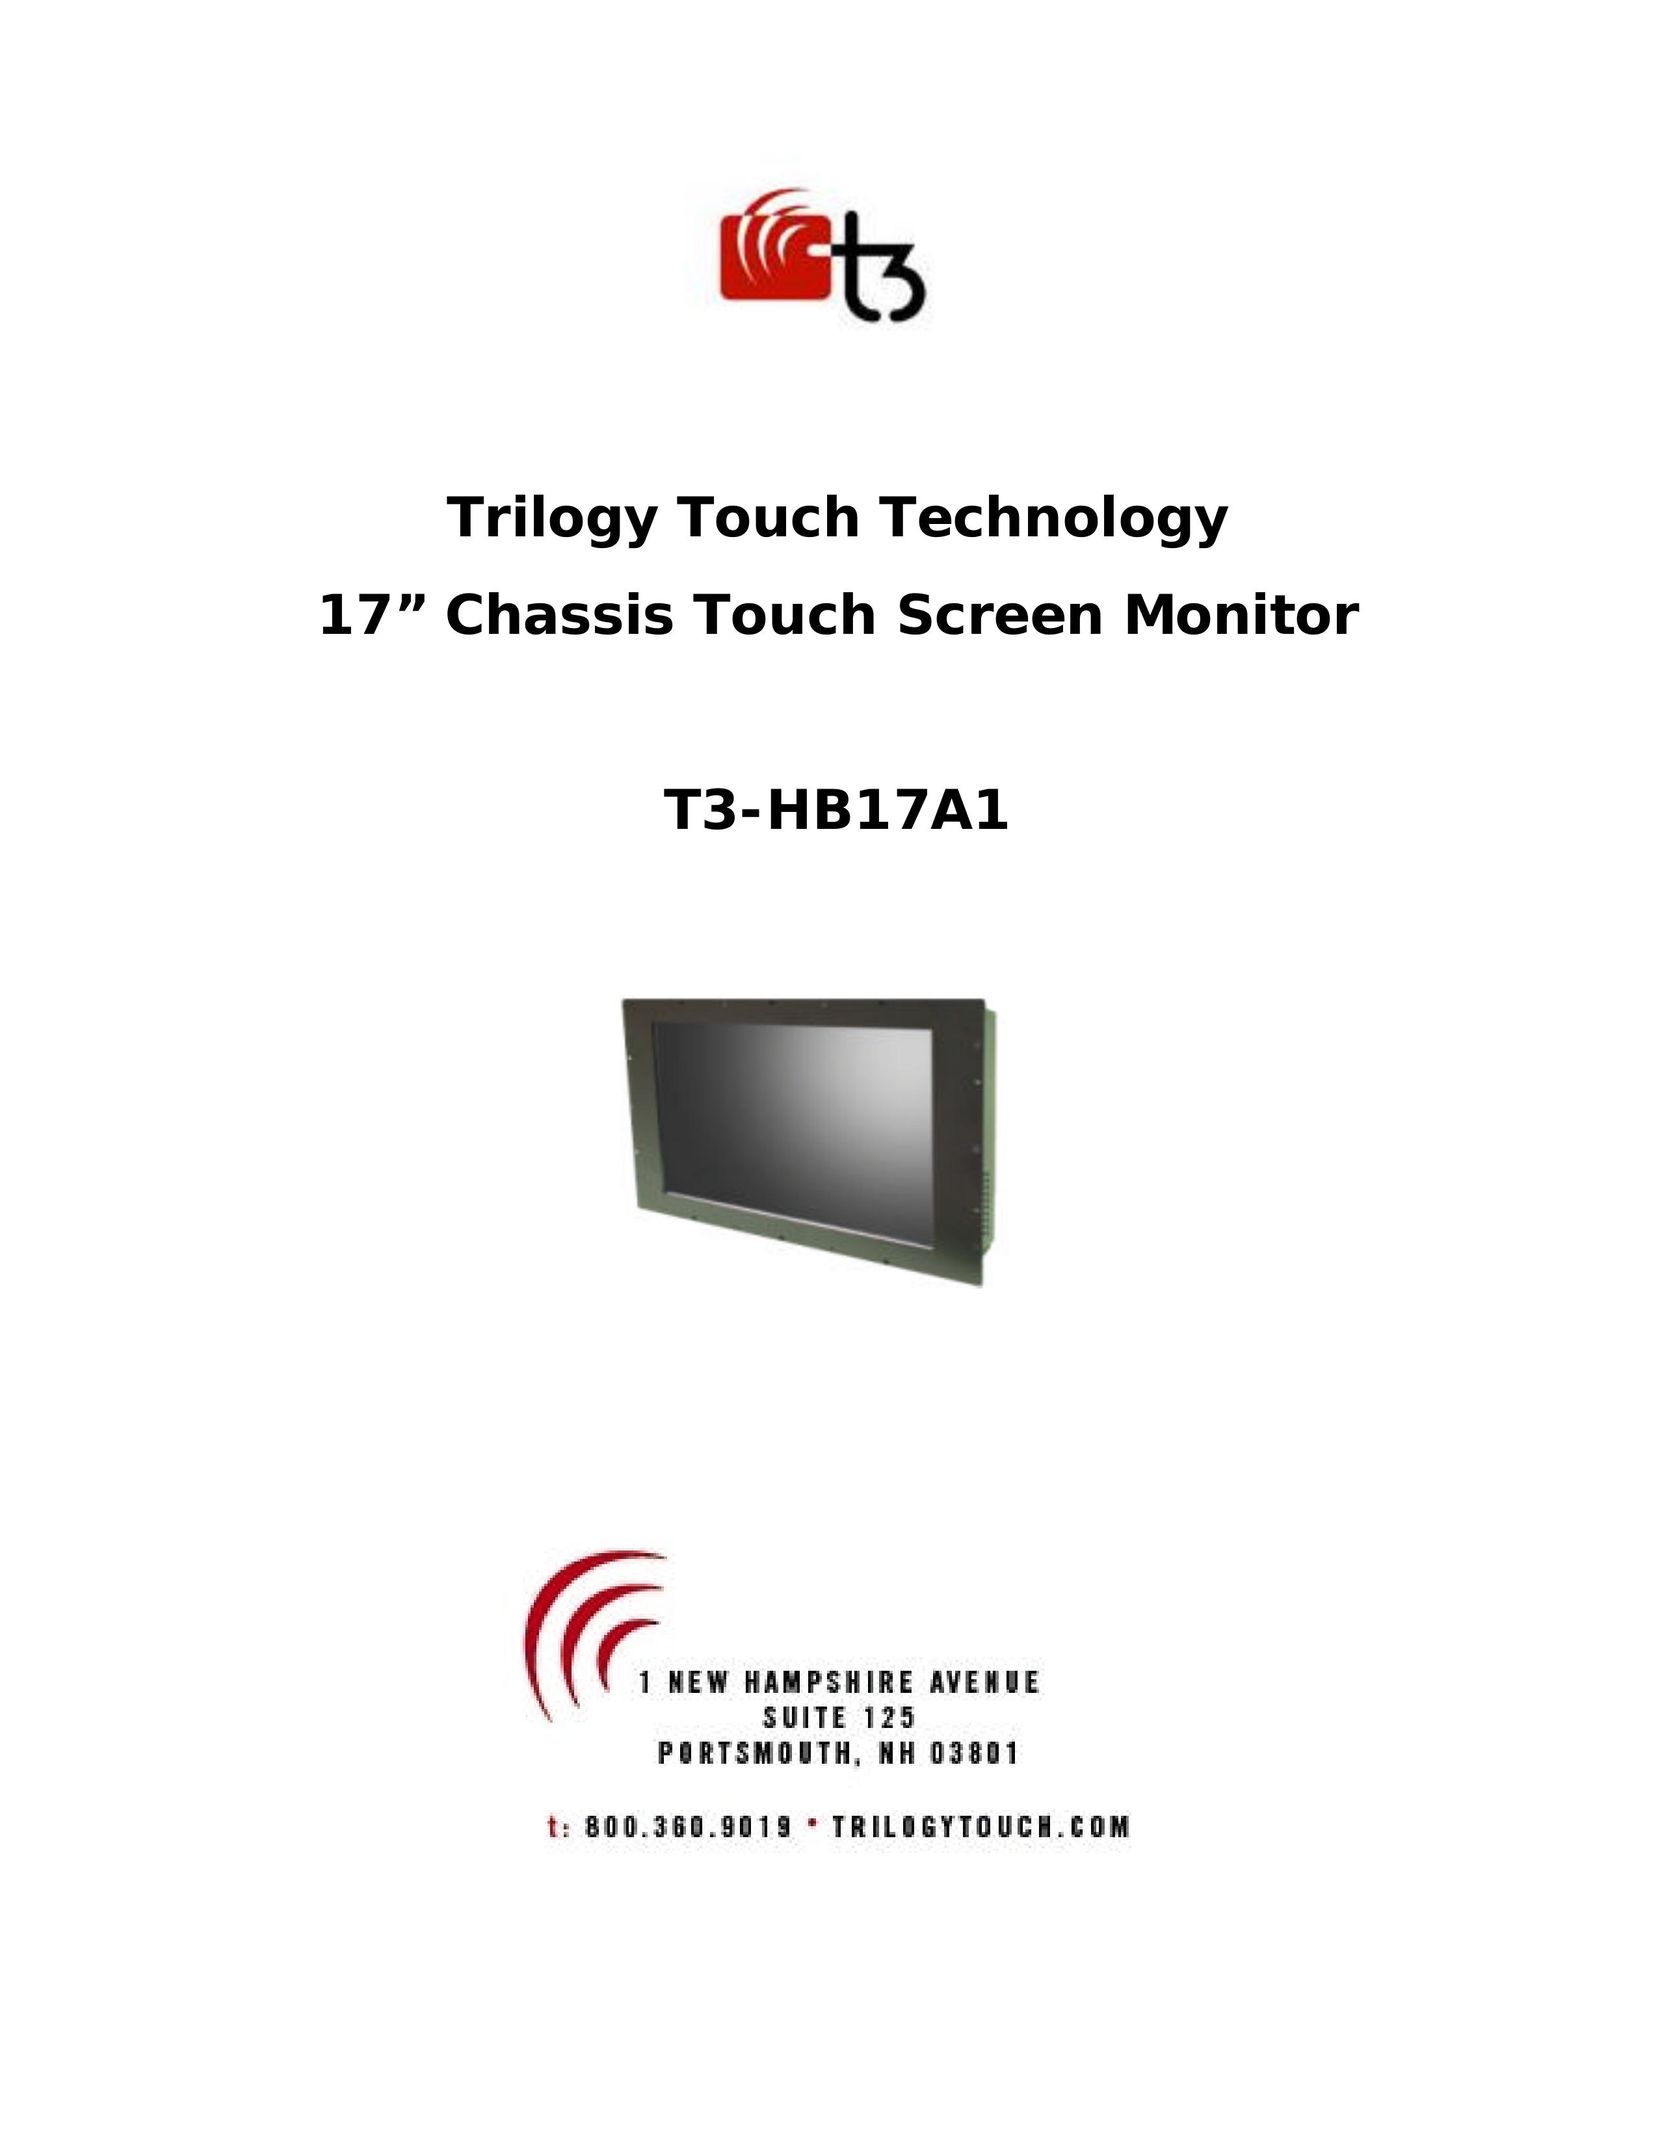 Trilogy Touch Technology T3-HB17A1 Computer Monitor User Manual